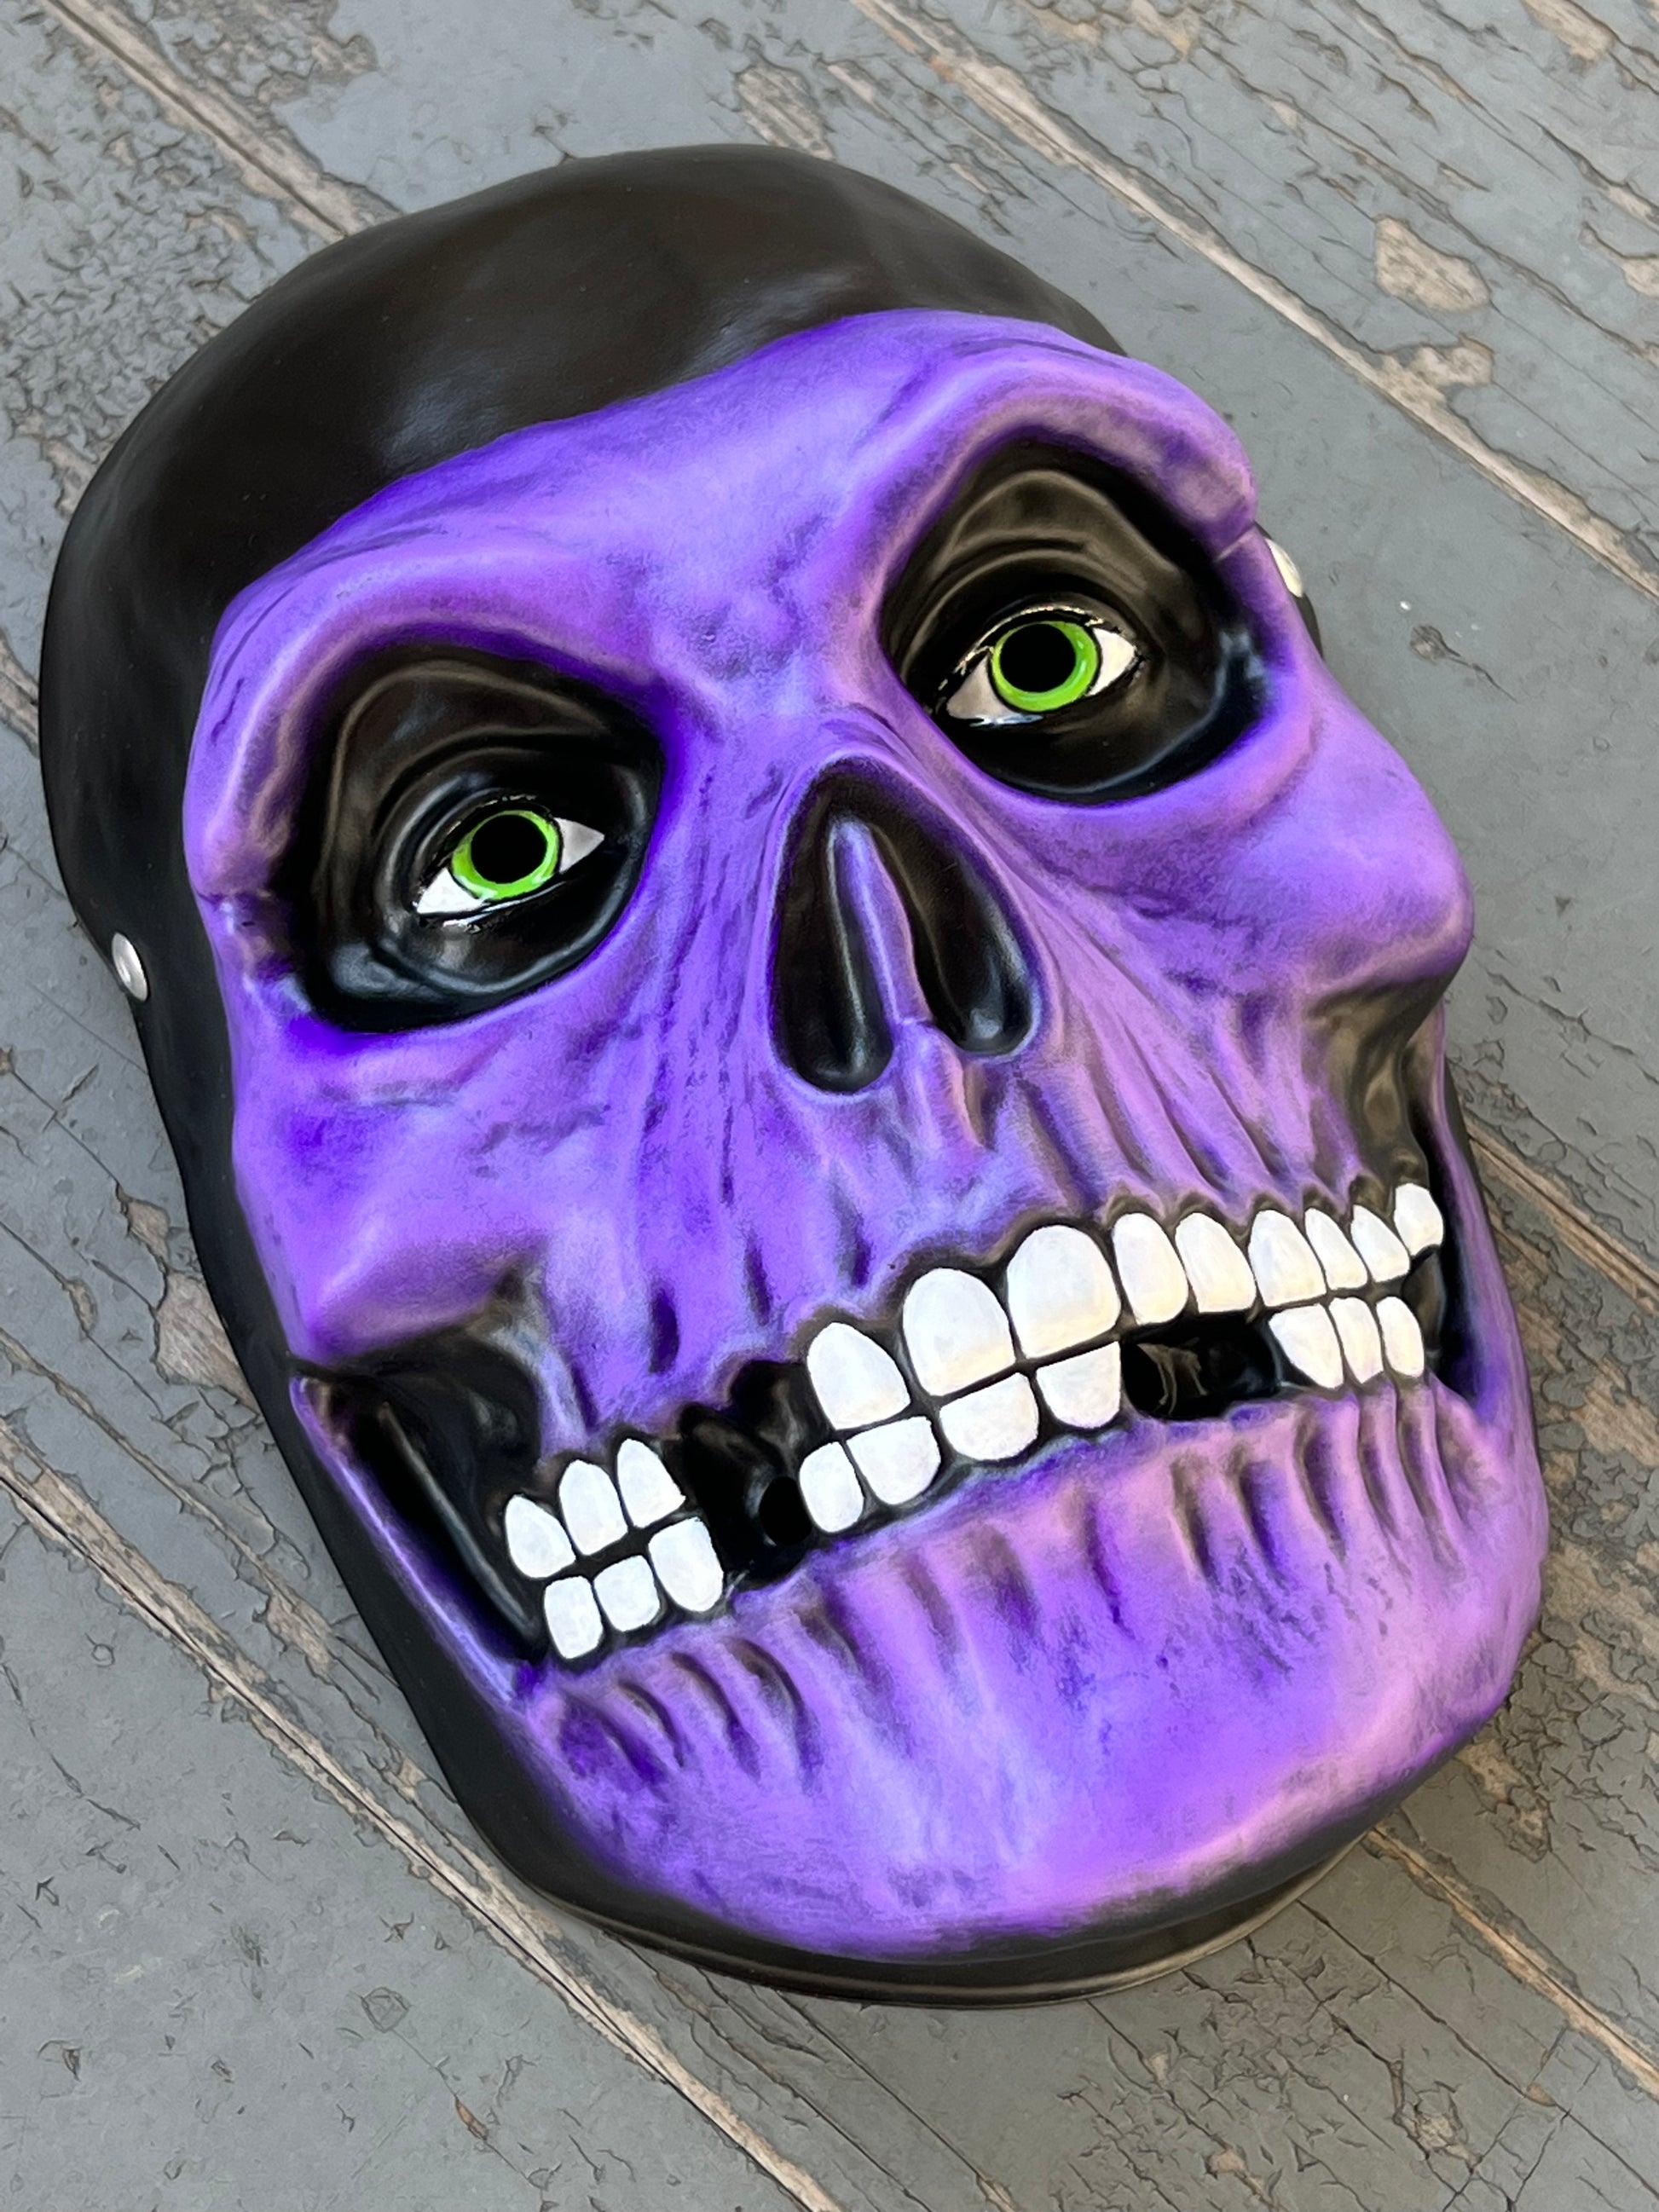 Misfits - The Fiend Customized Vacuform Mask - Ghoulish Creations LLC